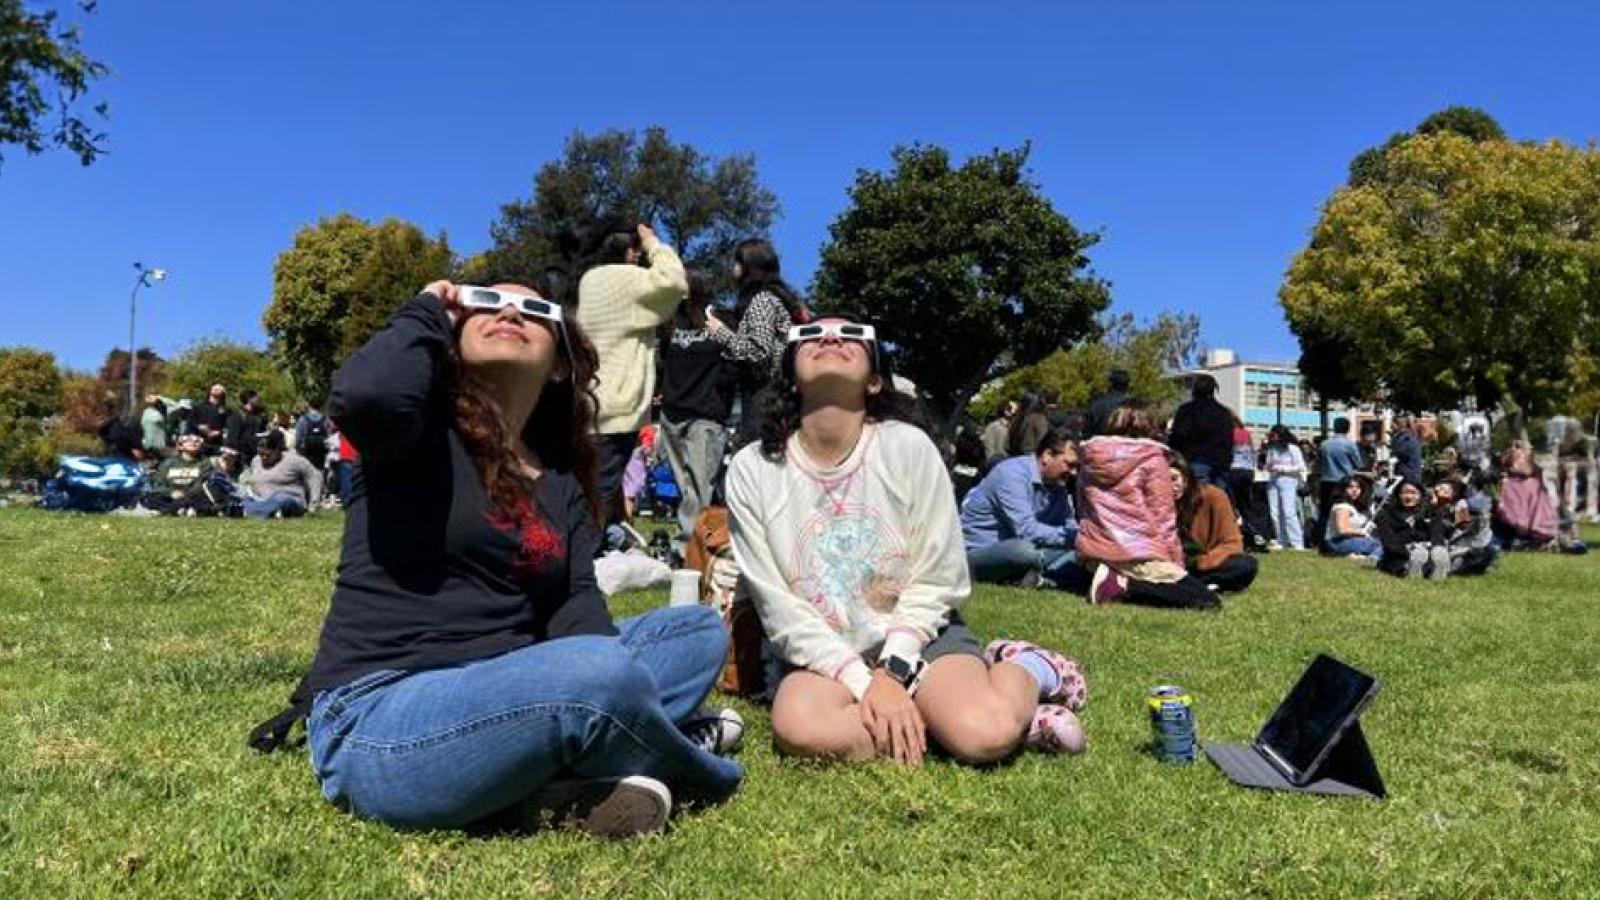 people sitting on grass watching eclipse with viewing glasses